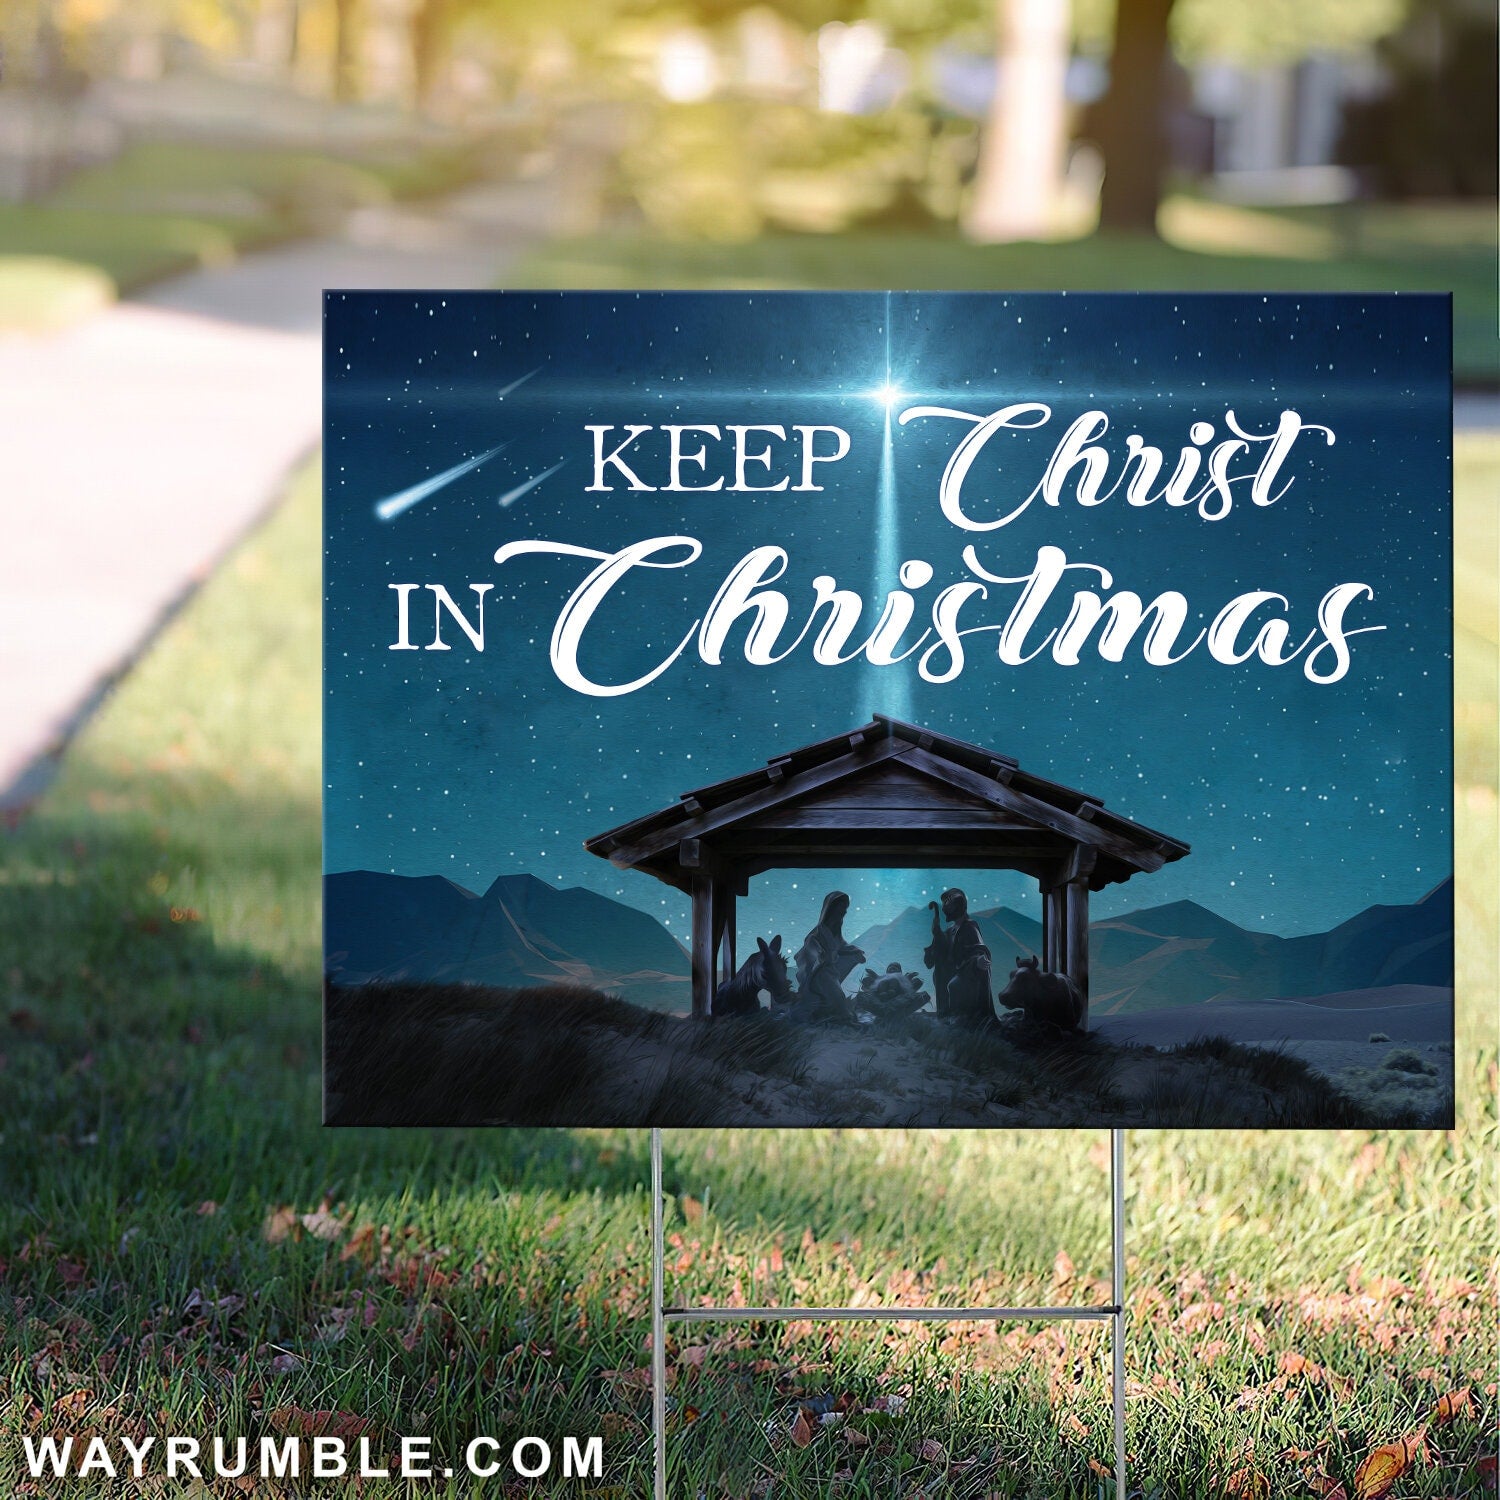 Keep Christ in Christmas - Jesus, Christmas, Wooden house in mountain Yard Sign